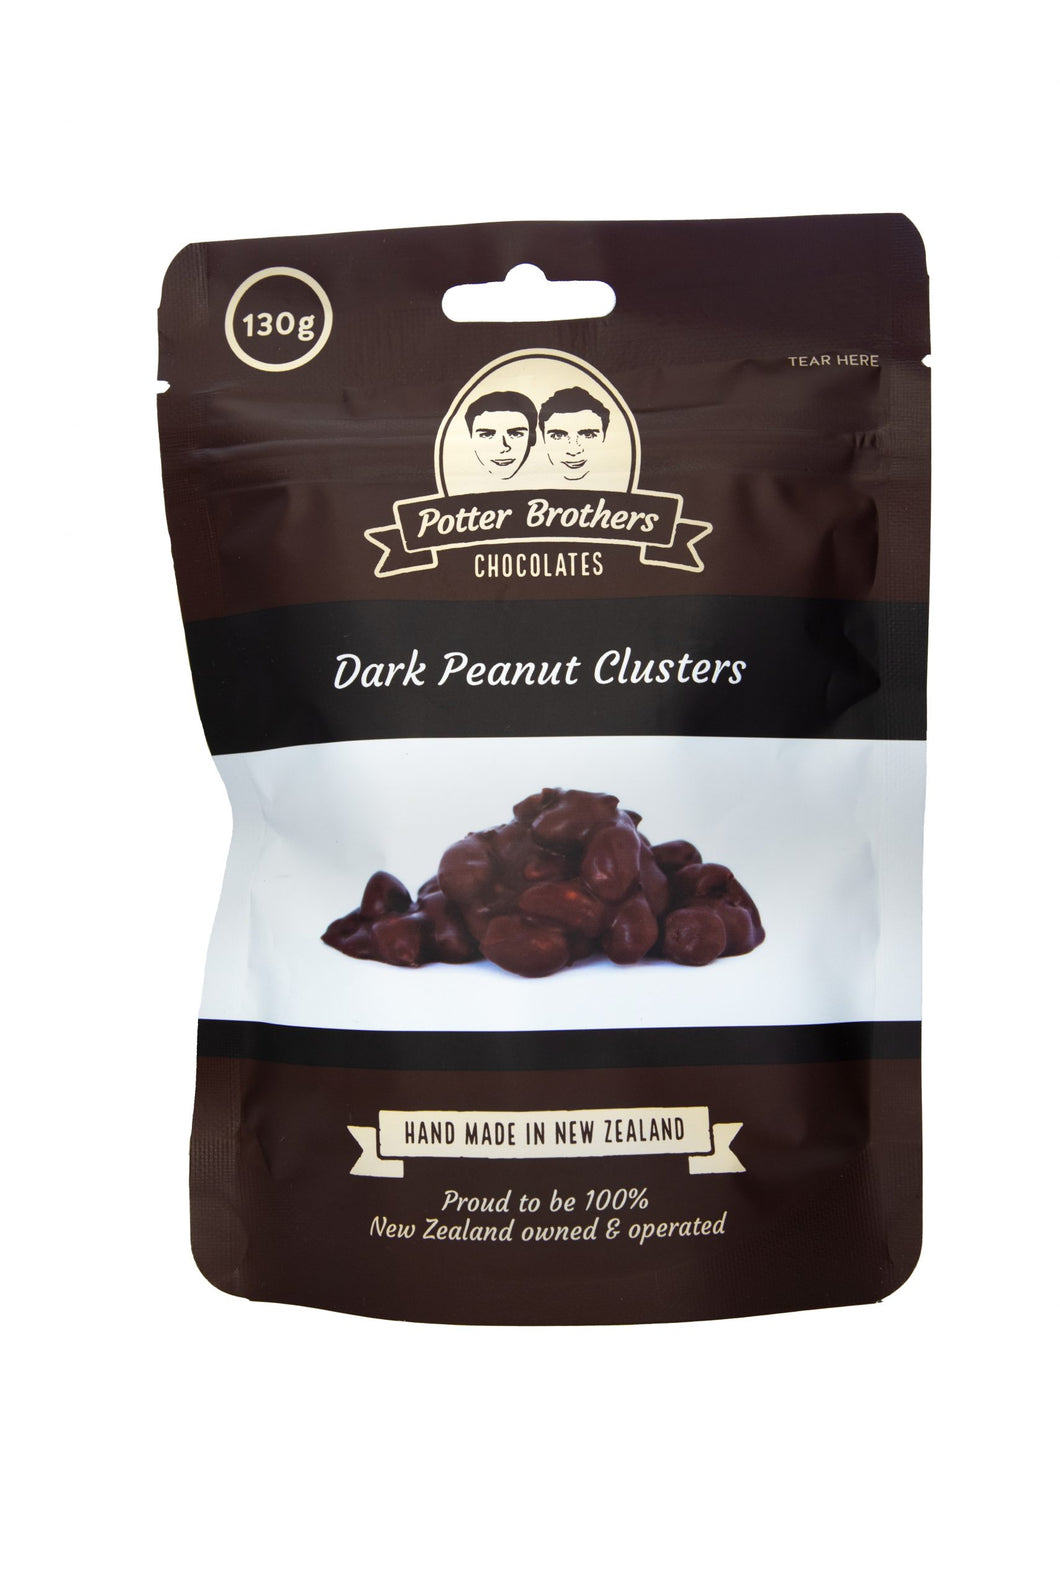 Potter Brothers Peanut Clusters In Dark Chocolate 130g